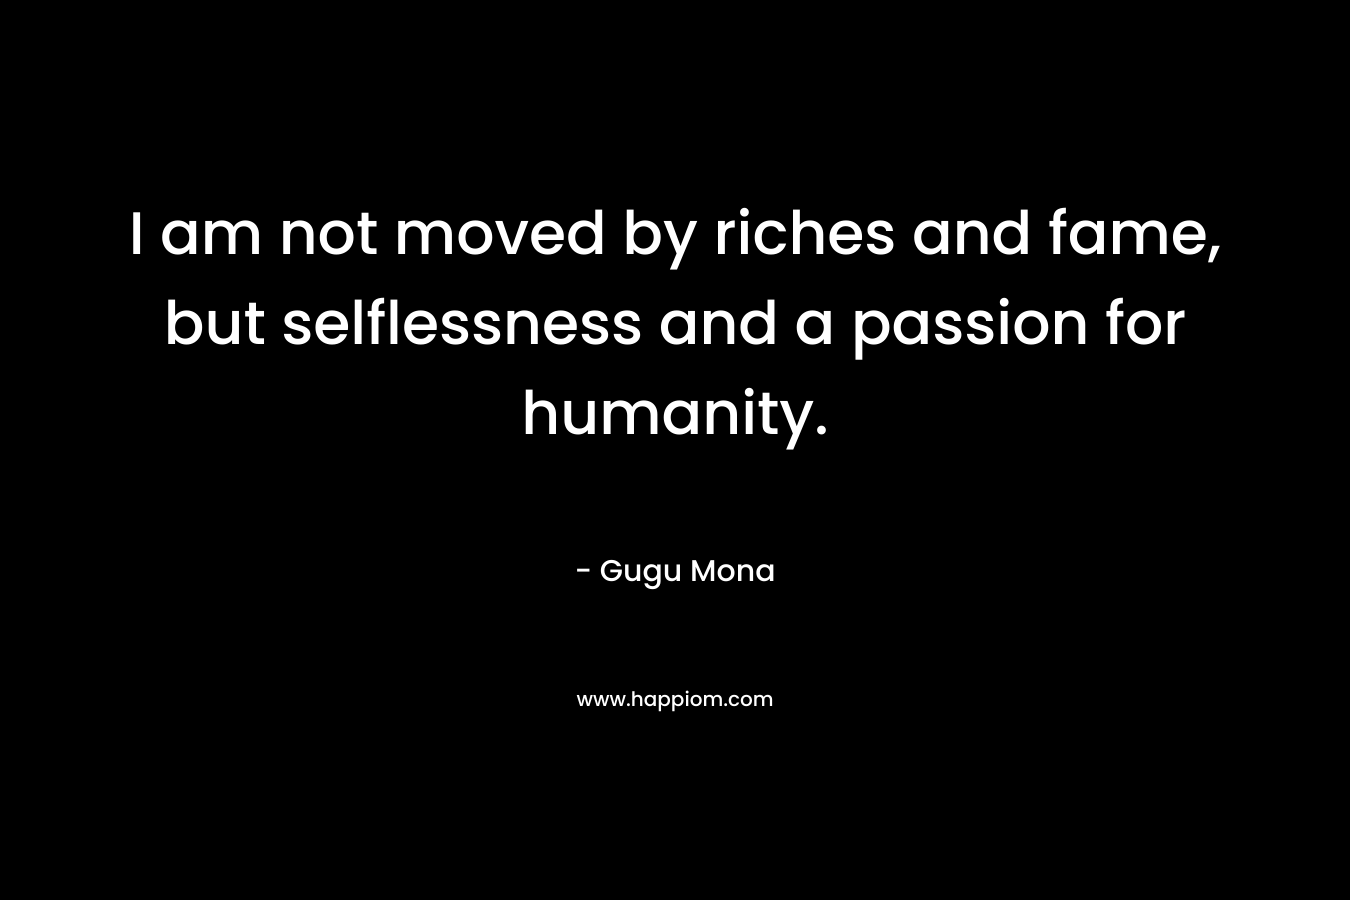 I am not moved by riches and fame, but selflessness and a passion for humanity. – Gugu Mona